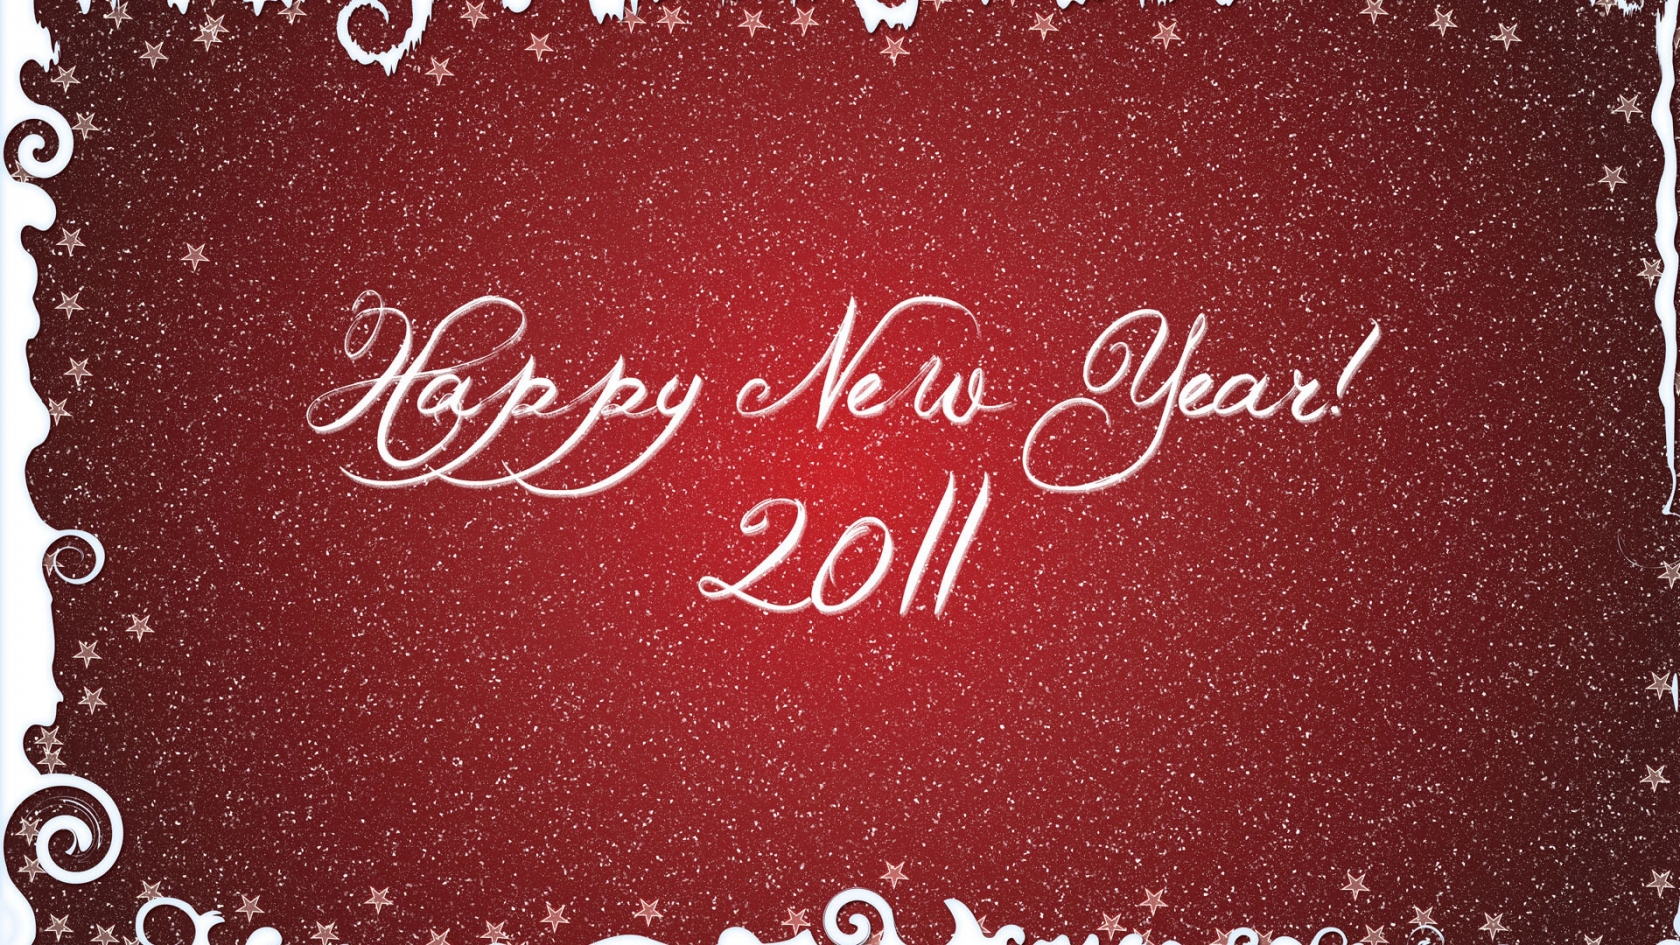 Happy New Year 2011 for 1680 x 945 HDTV resolution